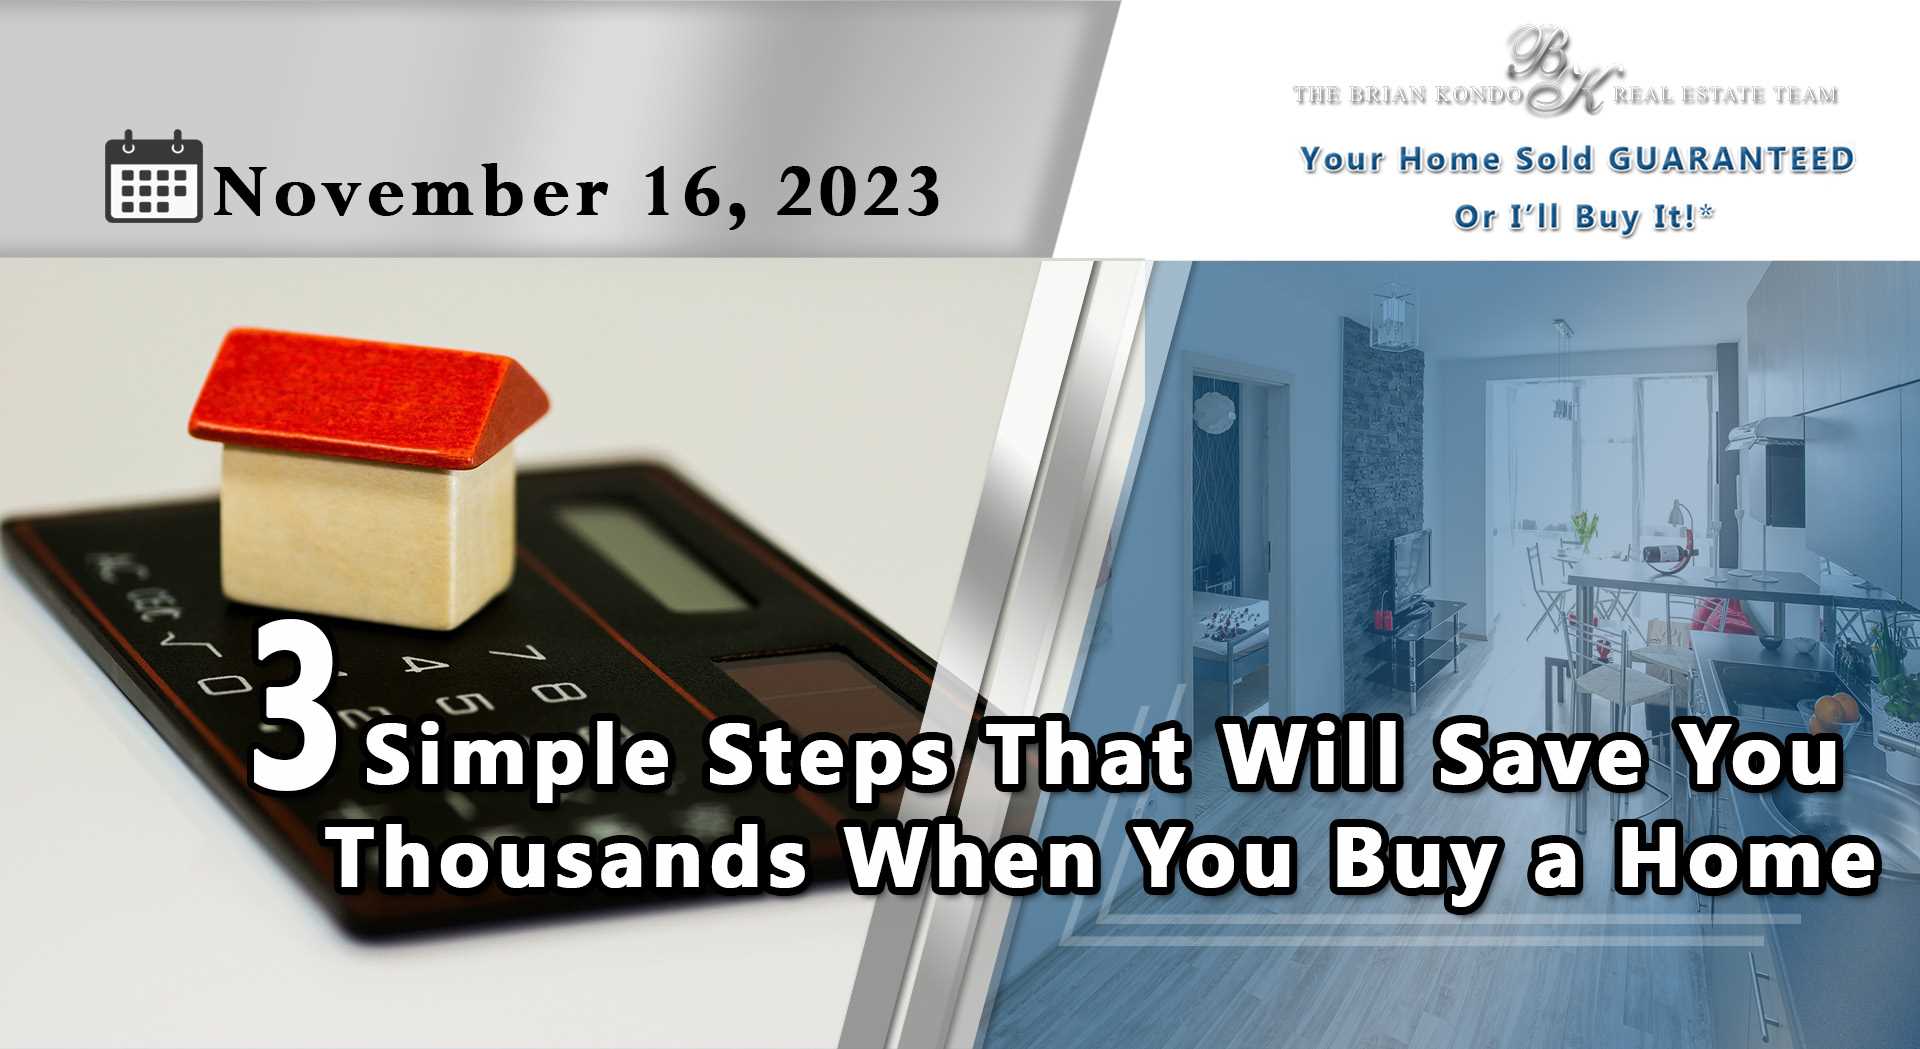 3 Simple Steps That Will Save You Thousands When You Buy a Home